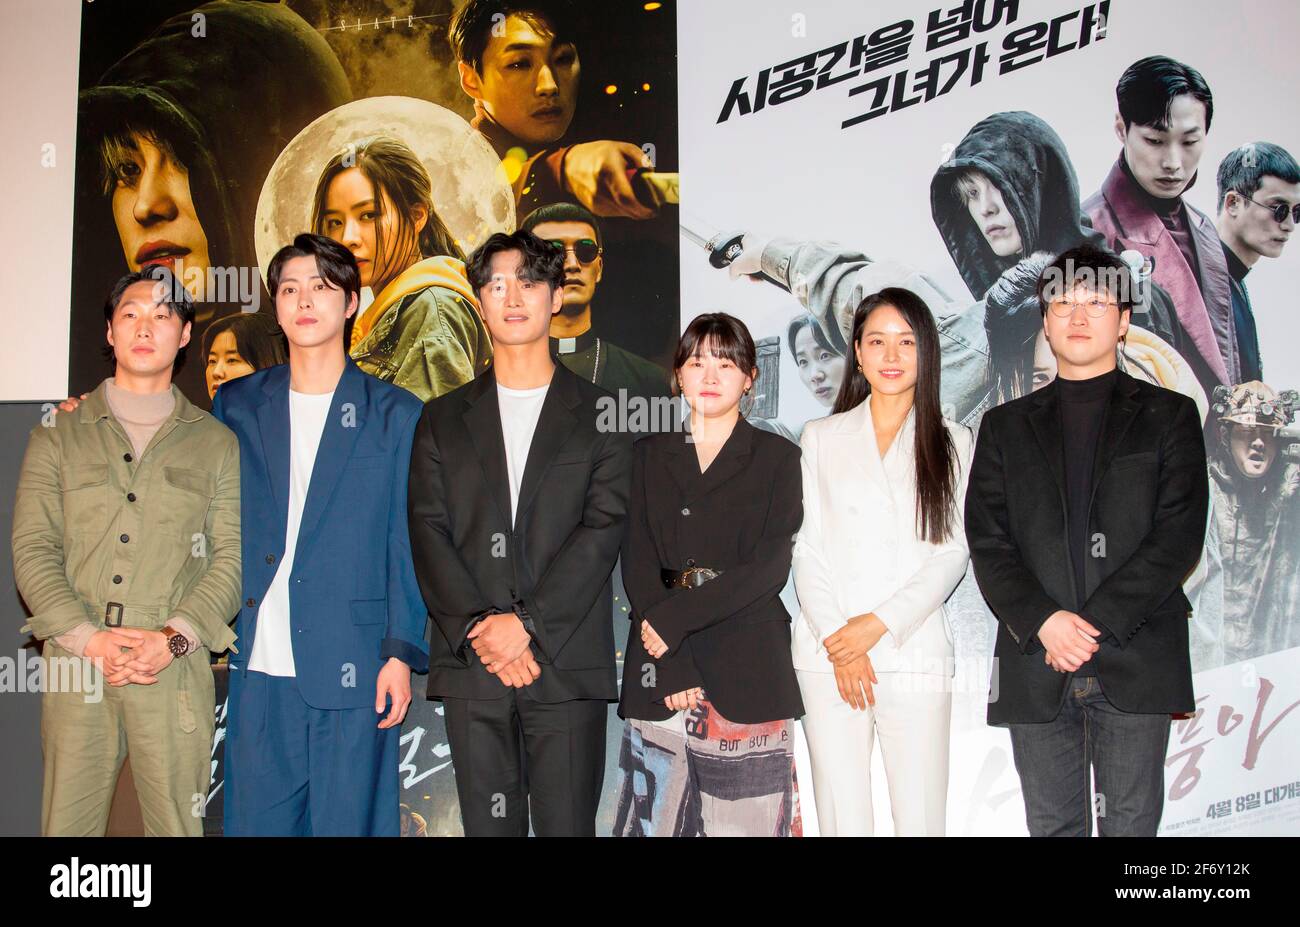 Park Tae-San, Cho Sun-Ki, Lee Se-Ho, Lee Min-Ji, Ahn Ji-Hye and Jo Ba-Reun, Apr 1, 2021 : Cast members (L-R) Park Tae-San, Cho Sun-Ki, Lee Se-Ho, Lee Min-Ji, Ahn Ji-Hye pose with film director Jo Ba-Reun during a press preview of a Korean movie 'Slate' at a cinema in Seoul, South Korea. 'Slate' is a South Korean fantasy action movie and it will be released on April 08, 2021. Credit: Lee Jae-Won/AFLO/Alamy Live News Stock Photo